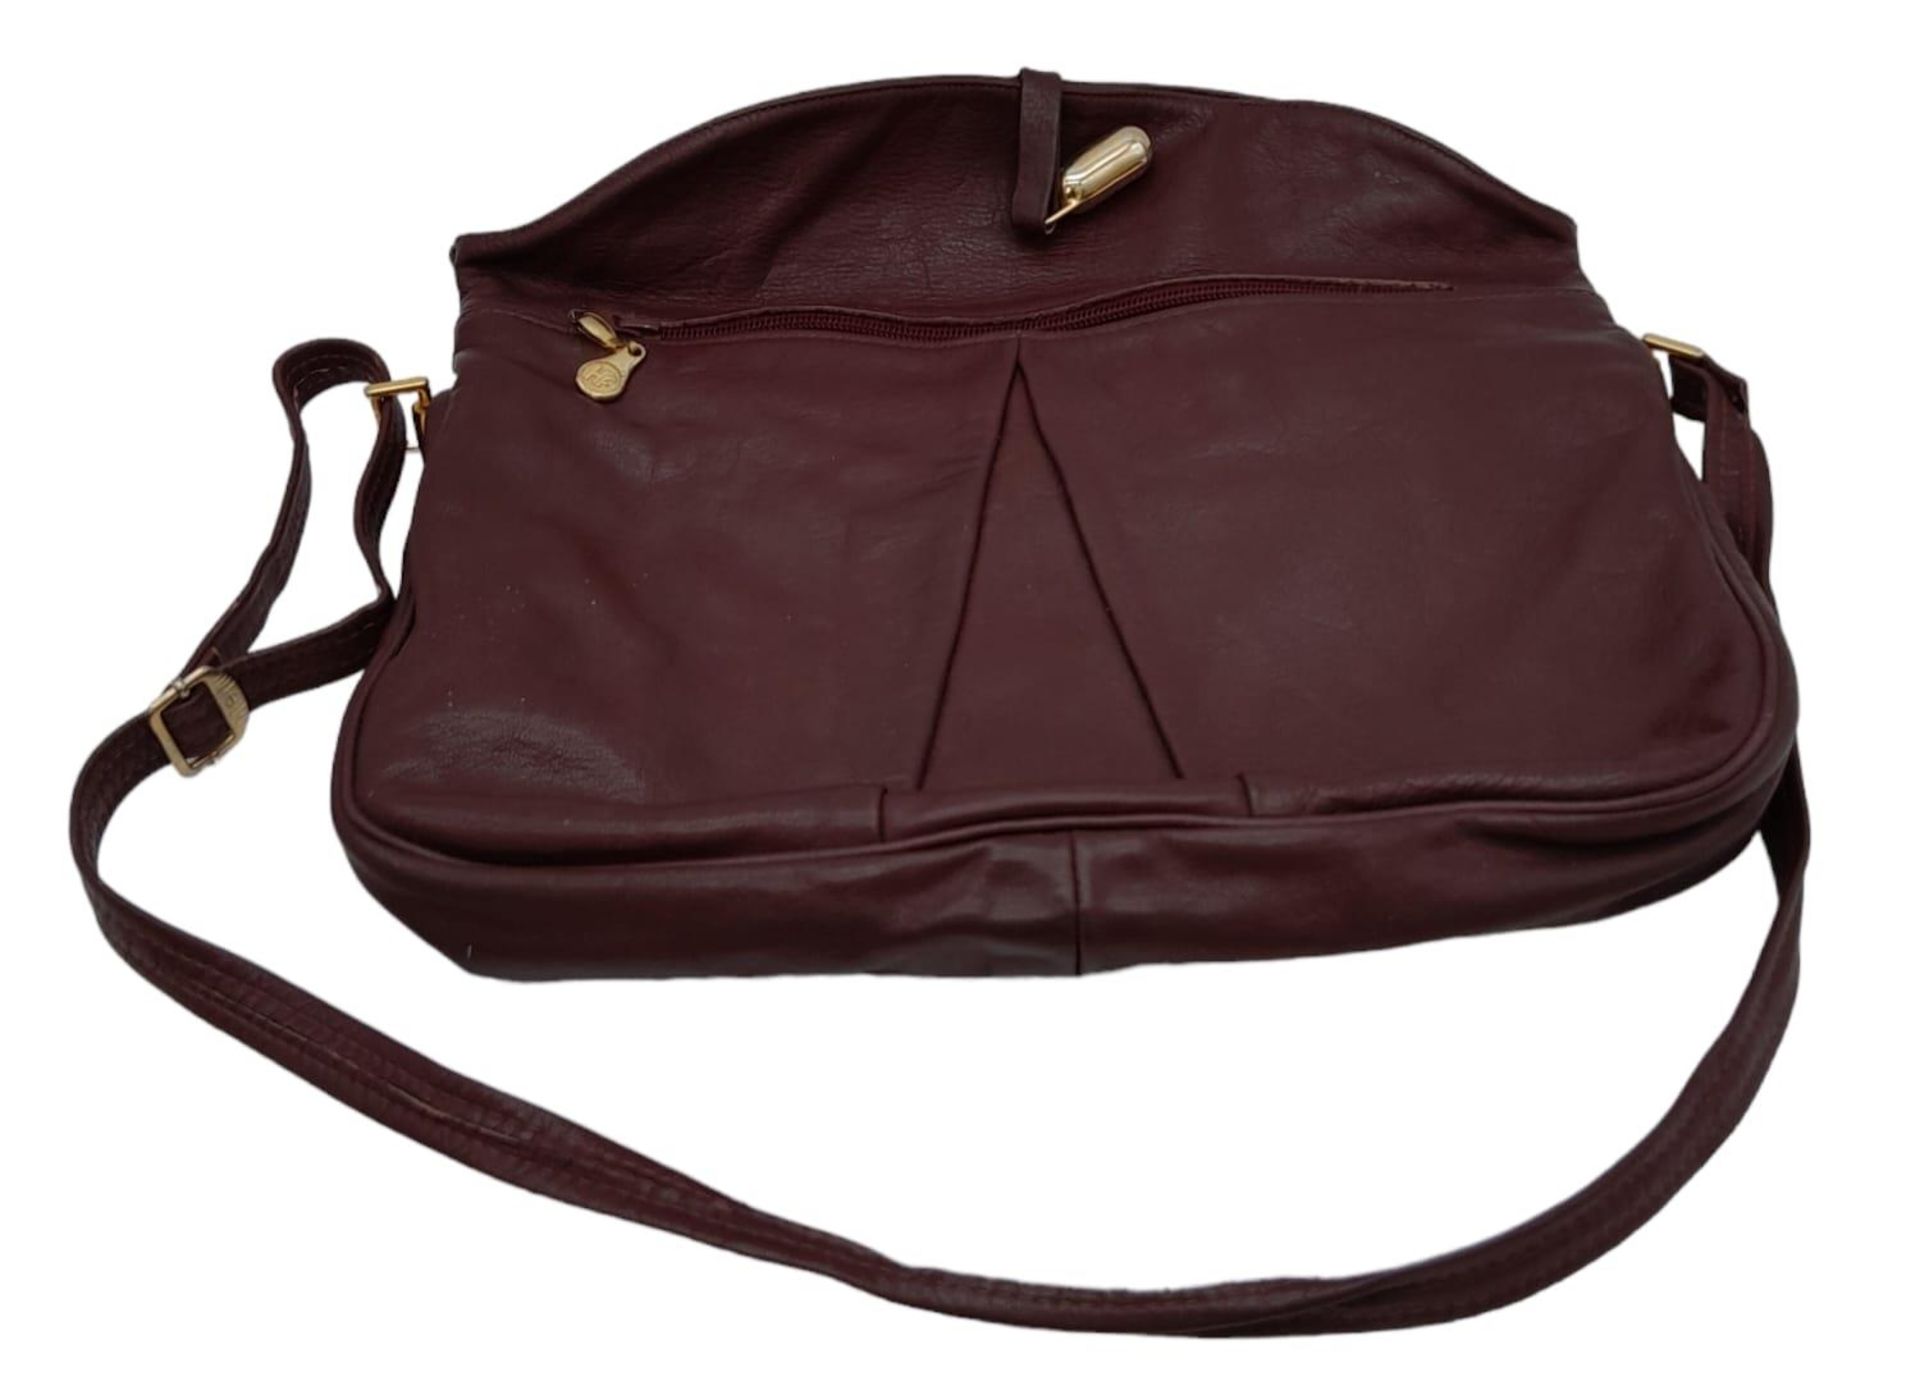 A Vintage Burgundy Leather Handbag. Burgundy leather with large exterior pocket. Gilded touches. - Image 6 of 9